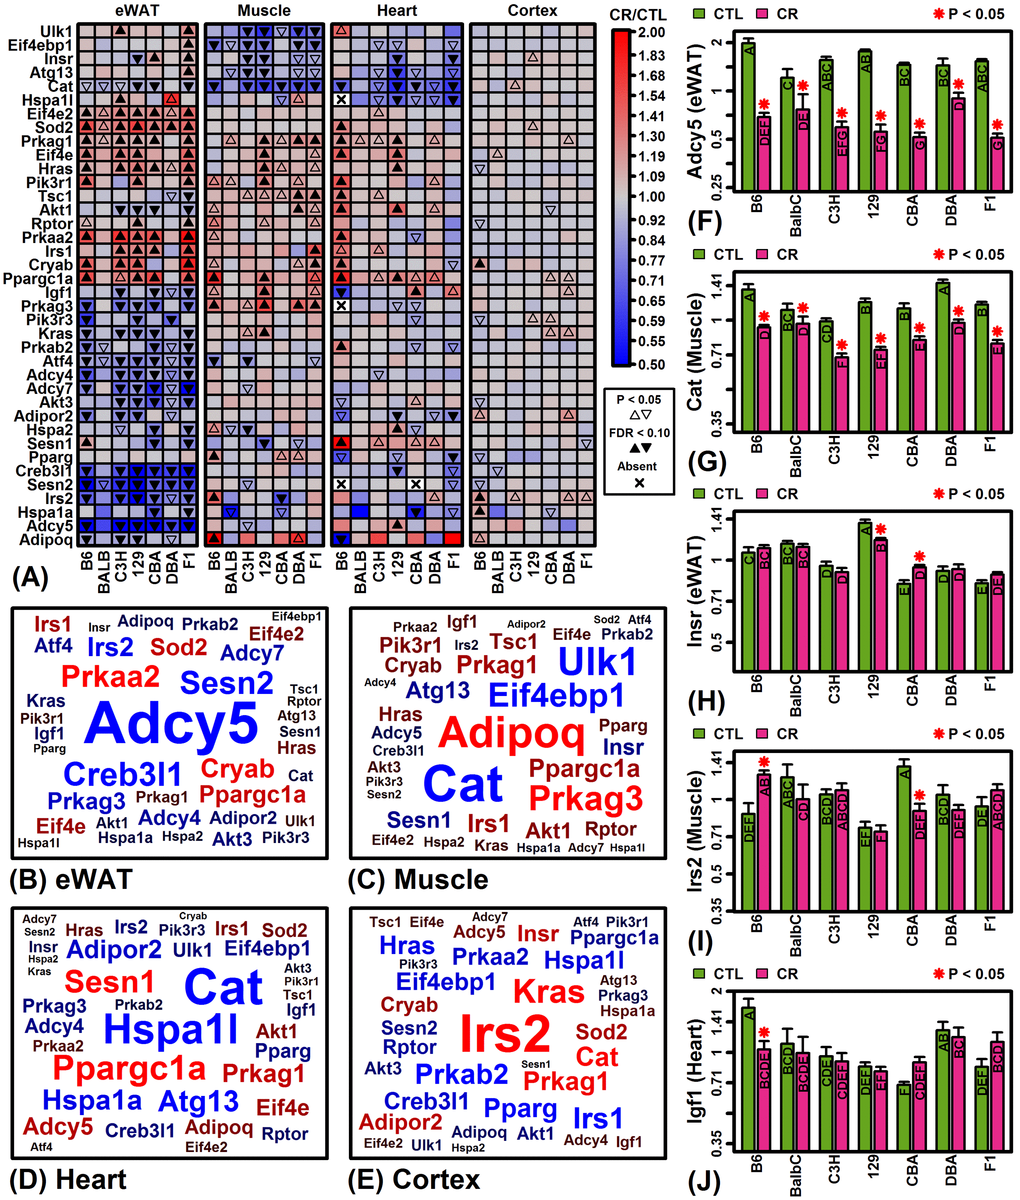 KEGG longevity-regulating pathways (hsa04211 and hsa04213). (A) Selected longevity pathway genes. The top 38 pathway genes were chosen to include those most frequently altered by CR across mouse strains and tissues. (B – E) Gene clouds. The size of gene symbols is proportional the median FC (CT/CTL) observed among strains for the indicated tissue (red: up-regulated; blue: down-regulated). Gene sizes are scaled separately for each tissue and thus not comparable across tissues. (F) adenylate cyclase 5 (Adcy5). (G) catalase (Cat). (H) insulin receptor (Insr). (I) insulin receptor substrate 2 (Irs2). (J) insulin-like growth factor 1 (Igf1). In (F) – (J), asterisks indicate that the CR treatment differs significantly from the CTL treatment for a given strain (P 